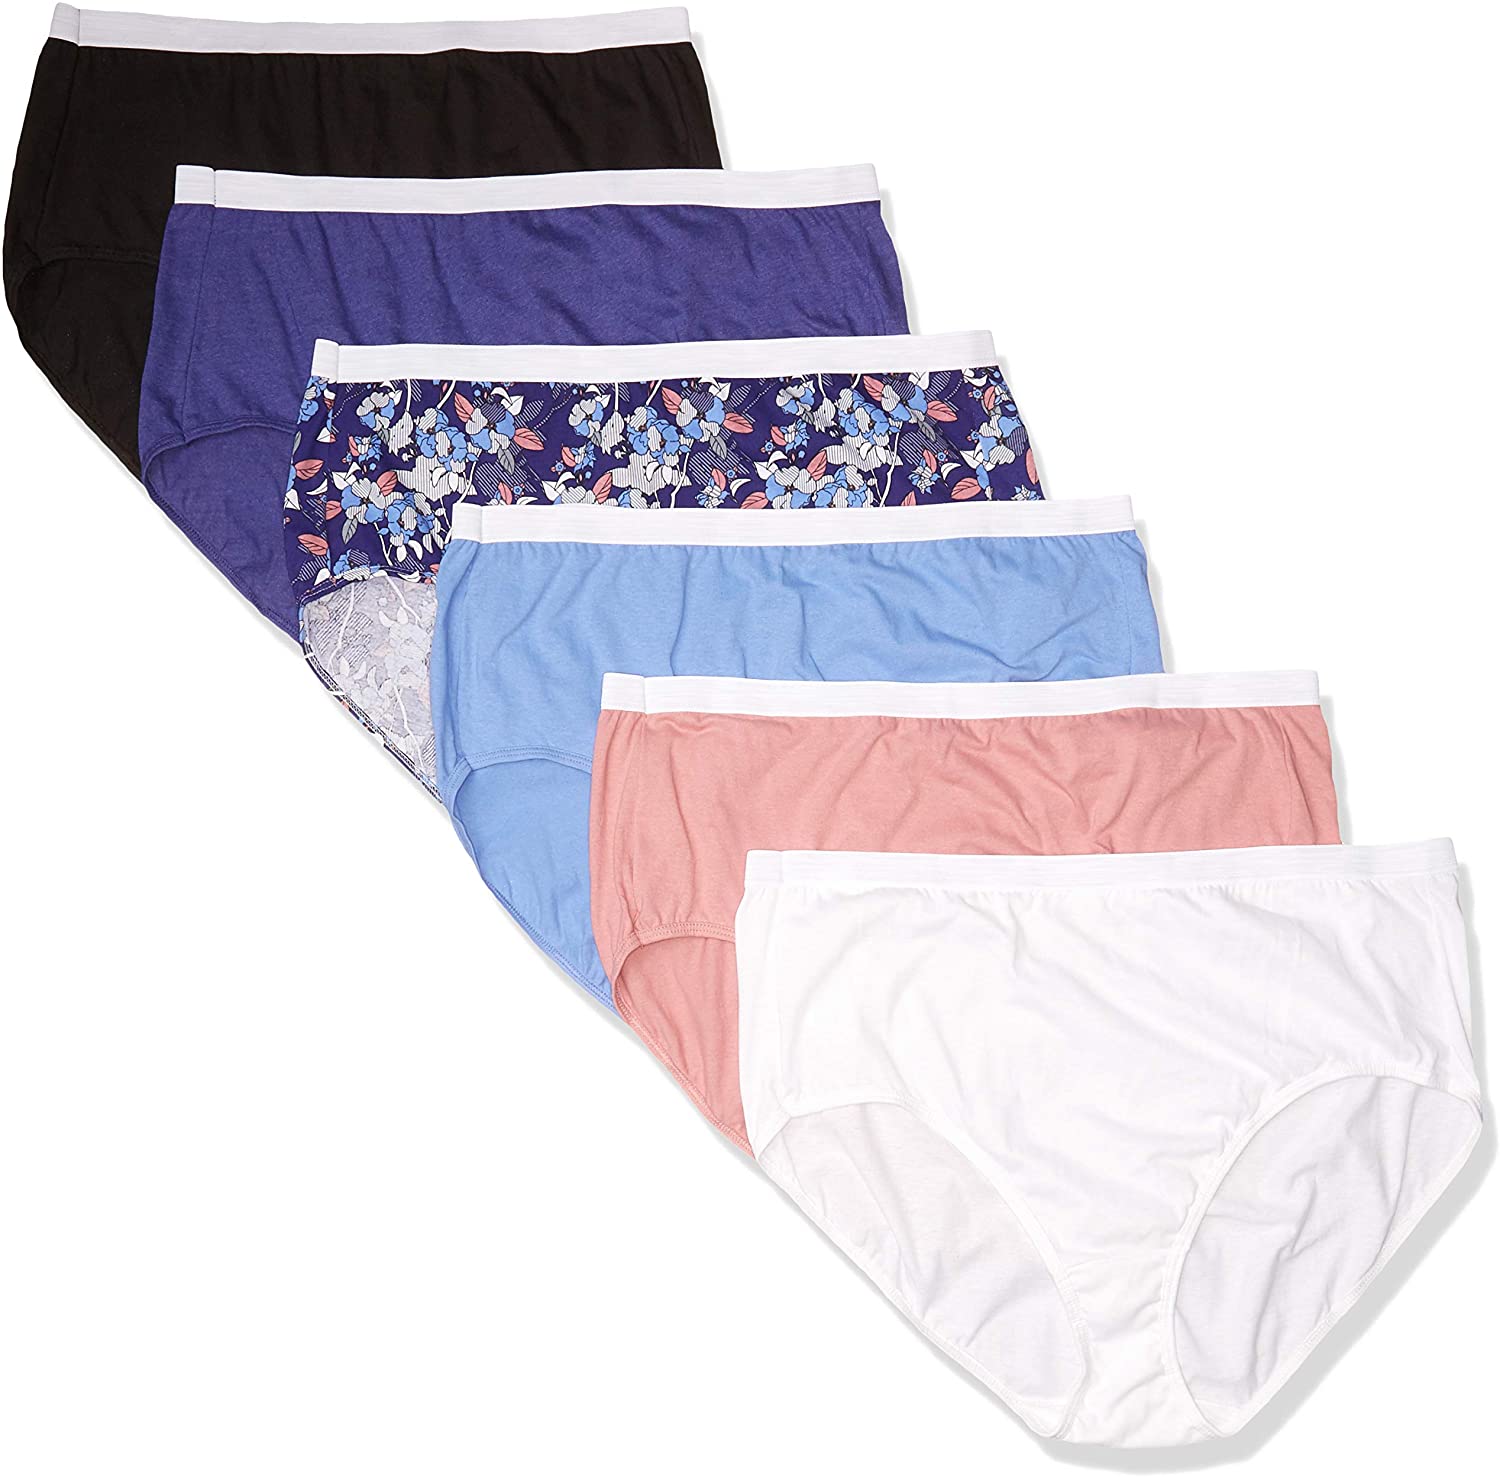 JUST MY SIZE Women's Plus Size Cool Comfort Cotton Brief 6-Pack | eBay